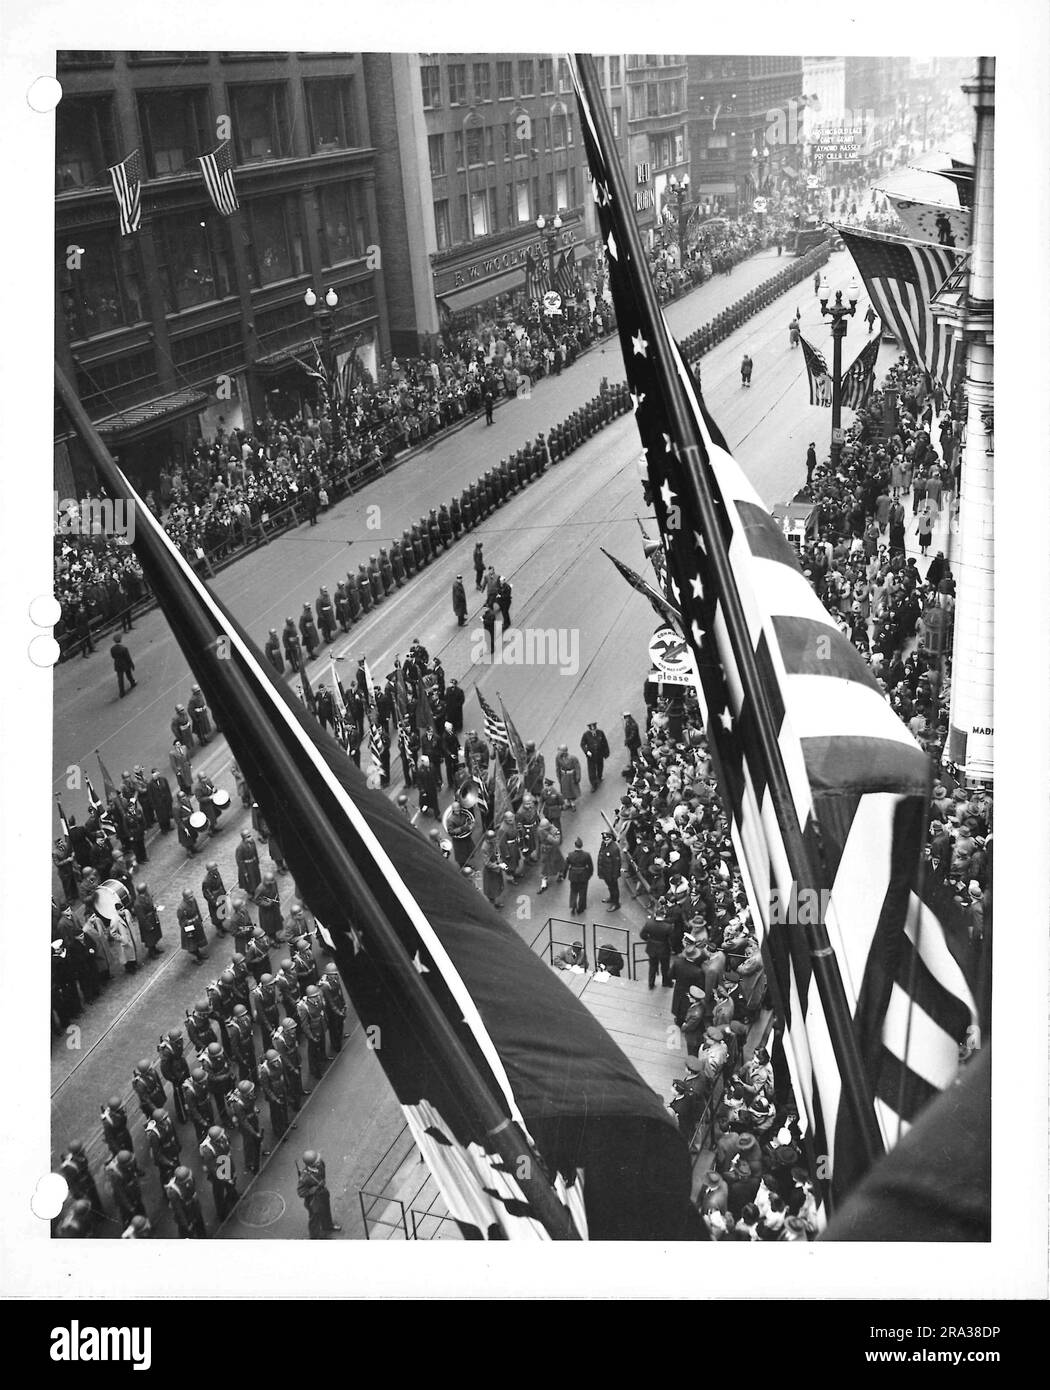 Photograph of Military Parade - Band in Front of Crowd and Flags - F.W. Woolworth Building in Background. Stock Photo